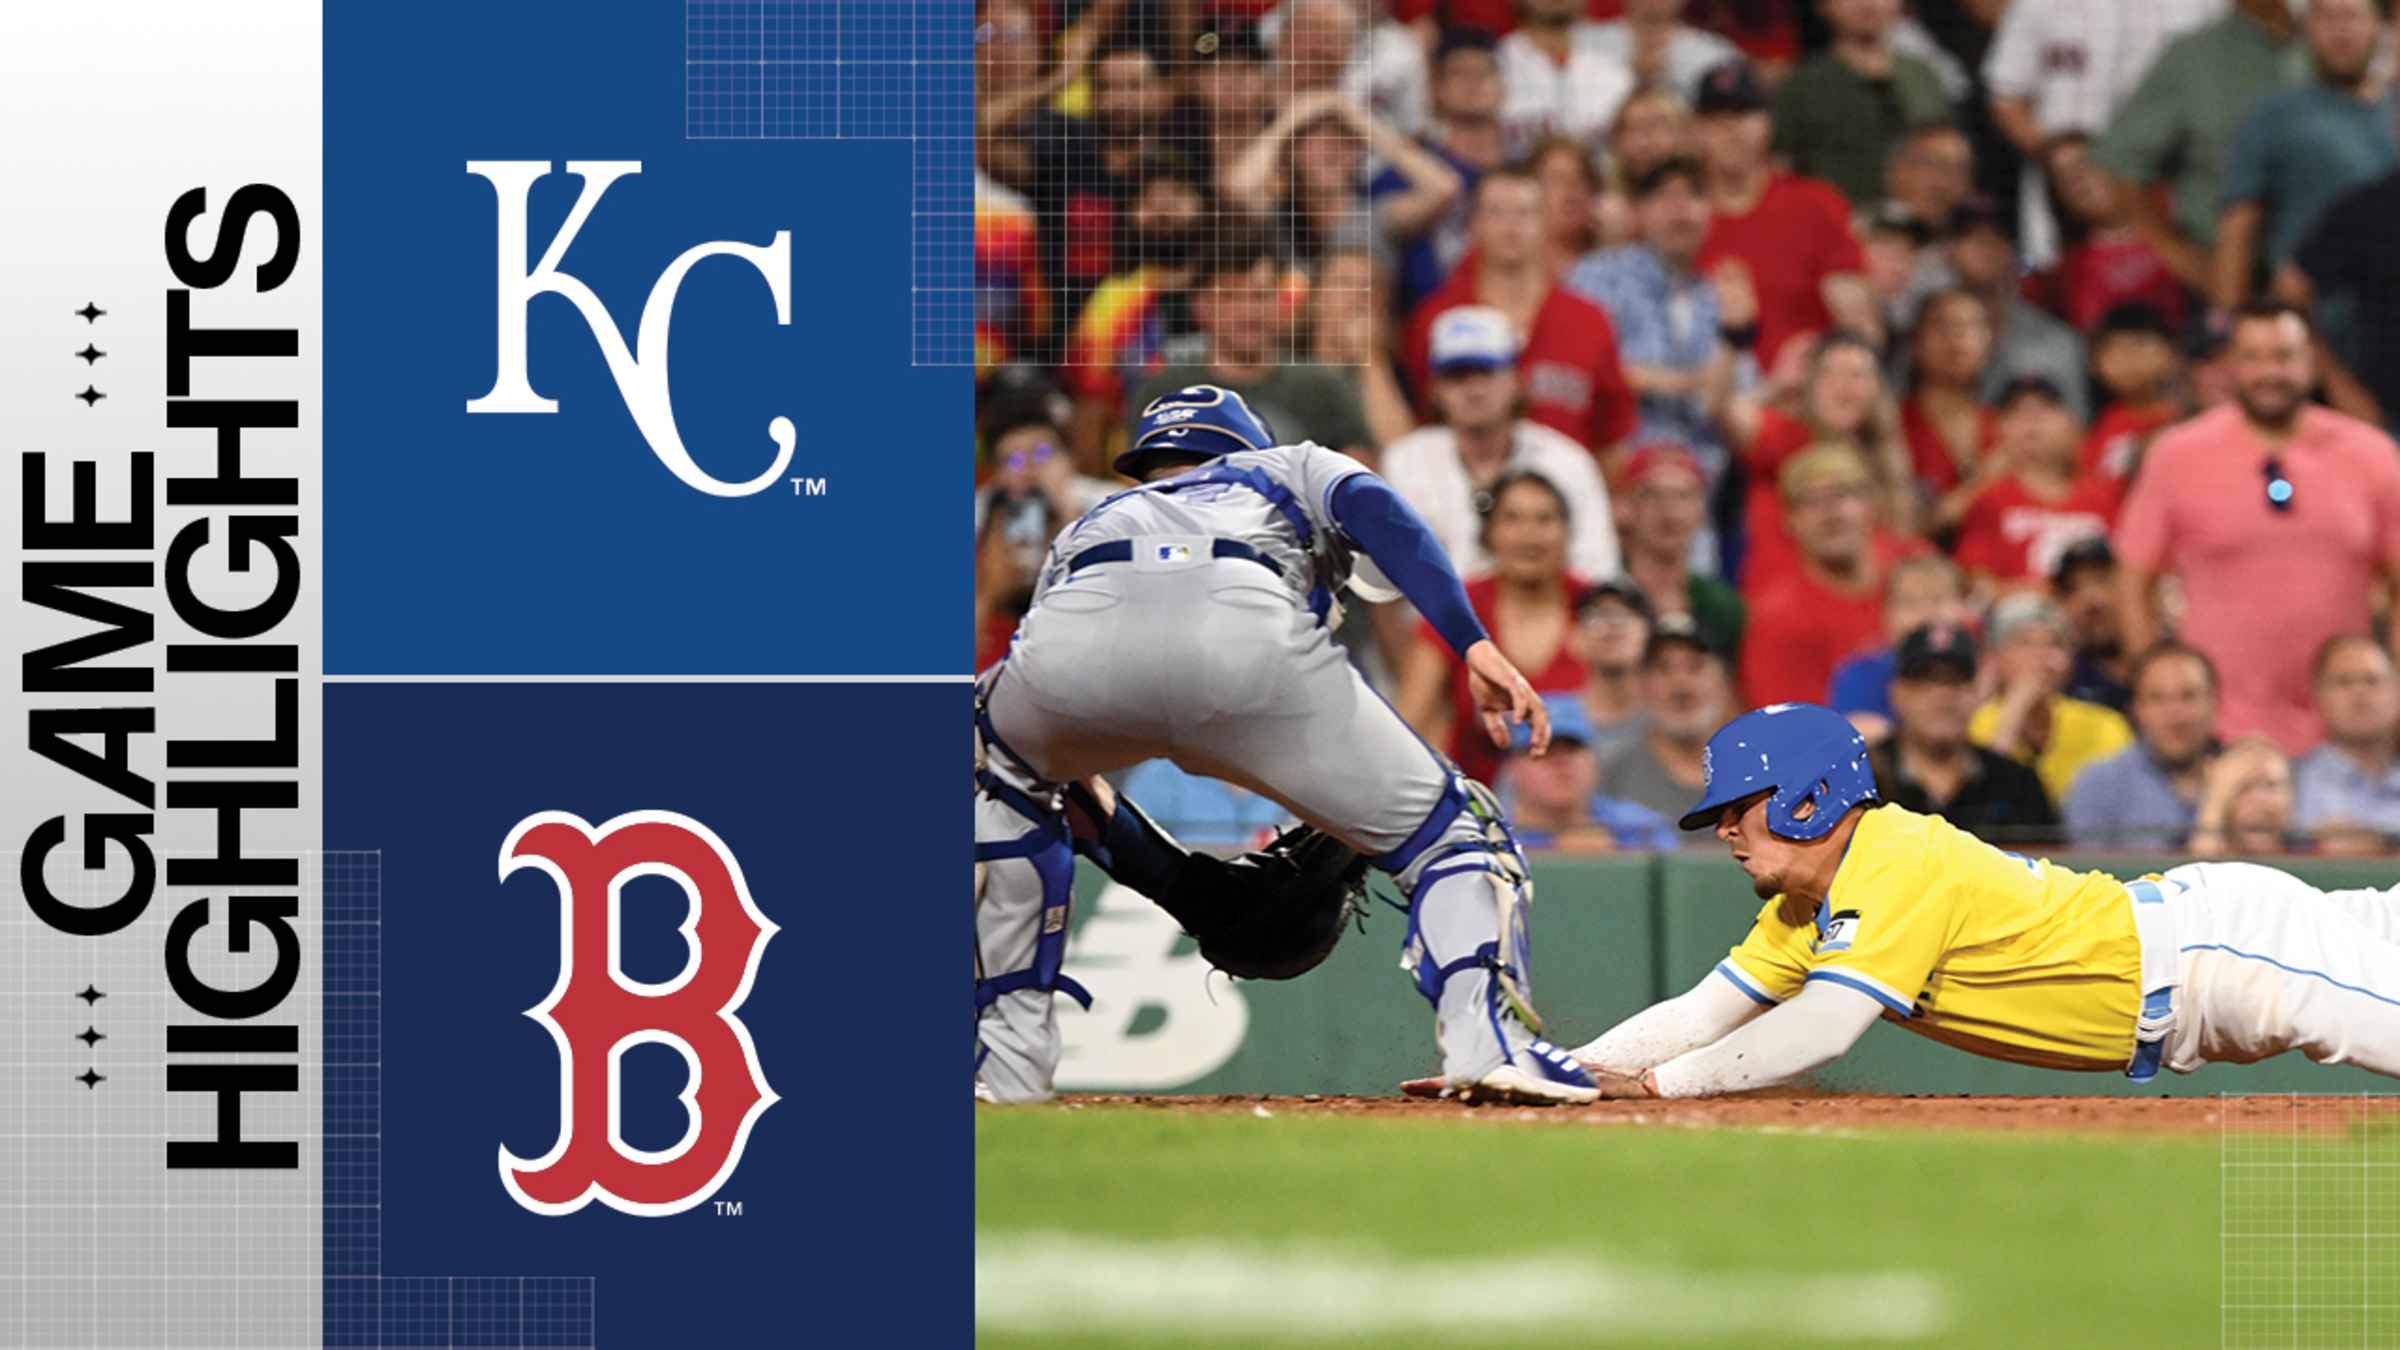 Red Sox in 4-3 victory over the Royals